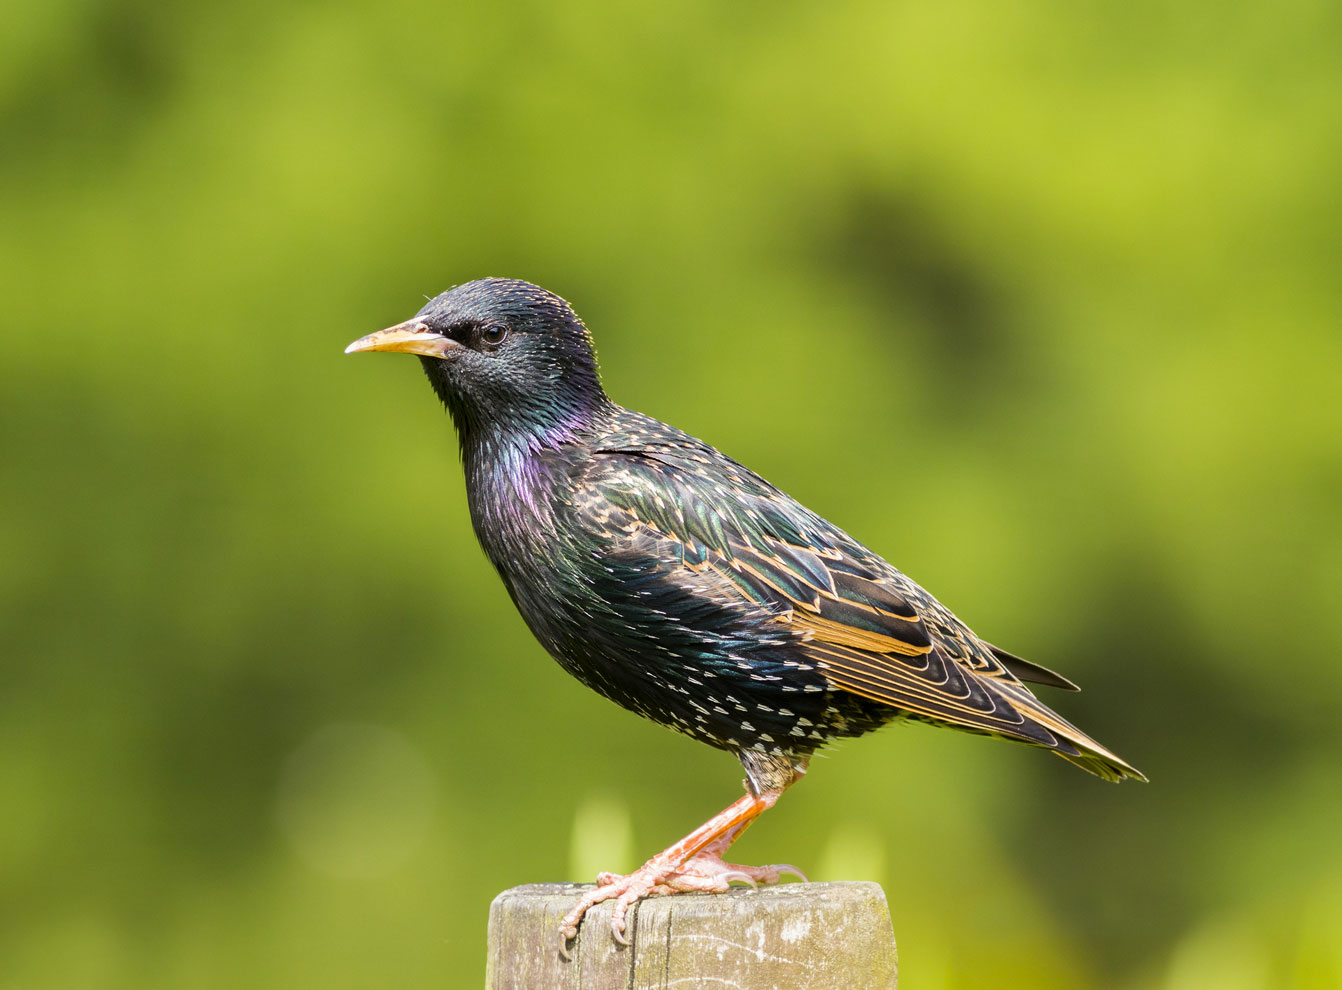 Starling removal services in Toronto area by QAPC.